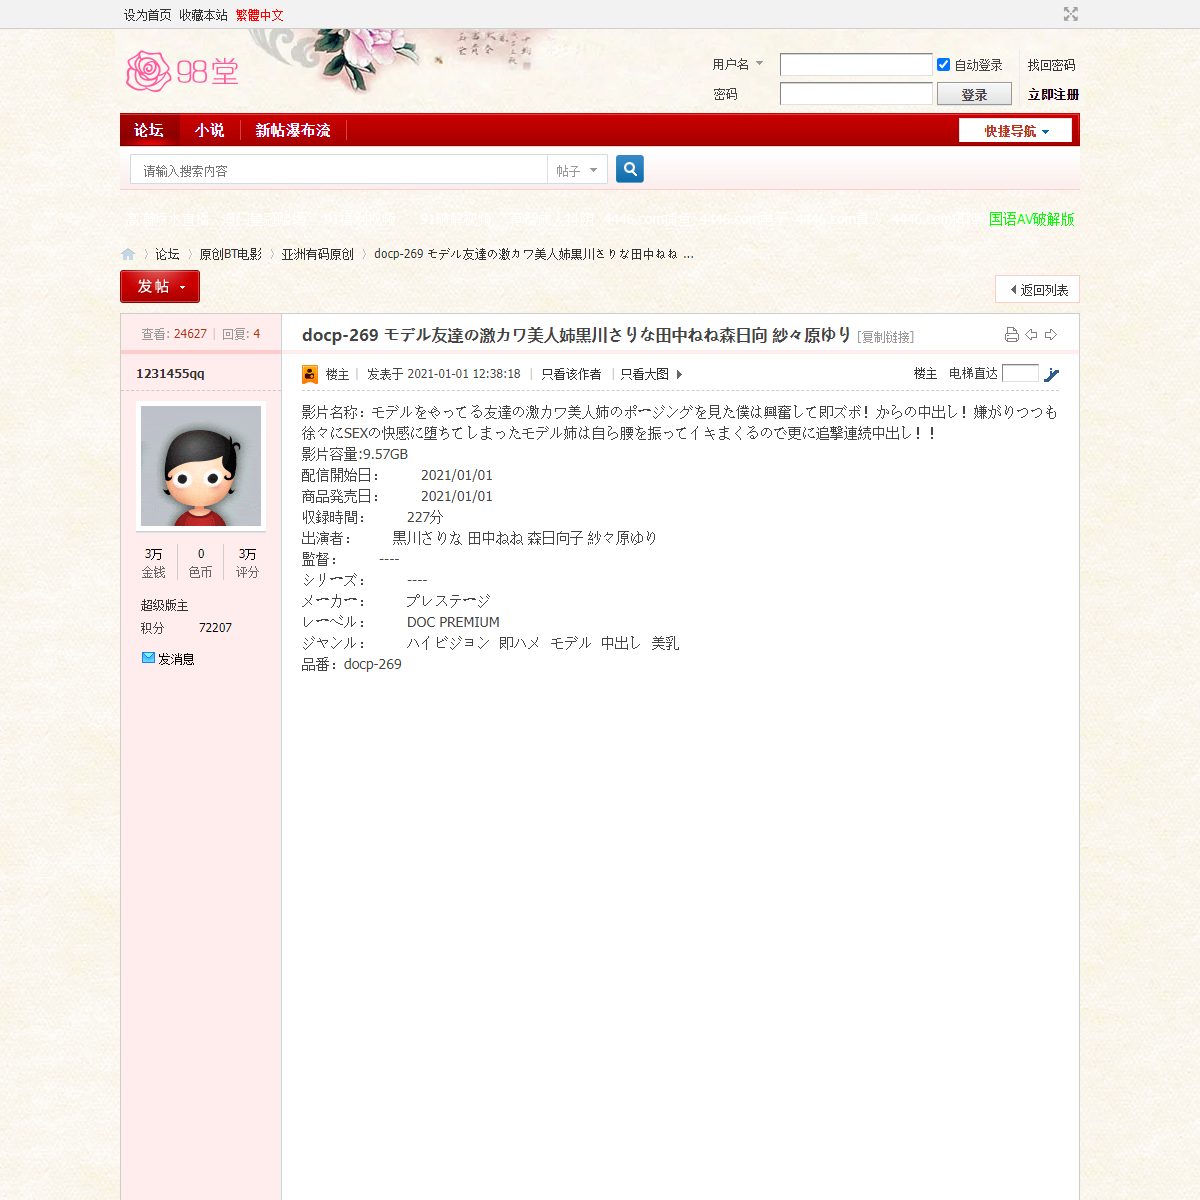 A complete backup of https://www.sehuatang.net/thread-435964-1-1.html